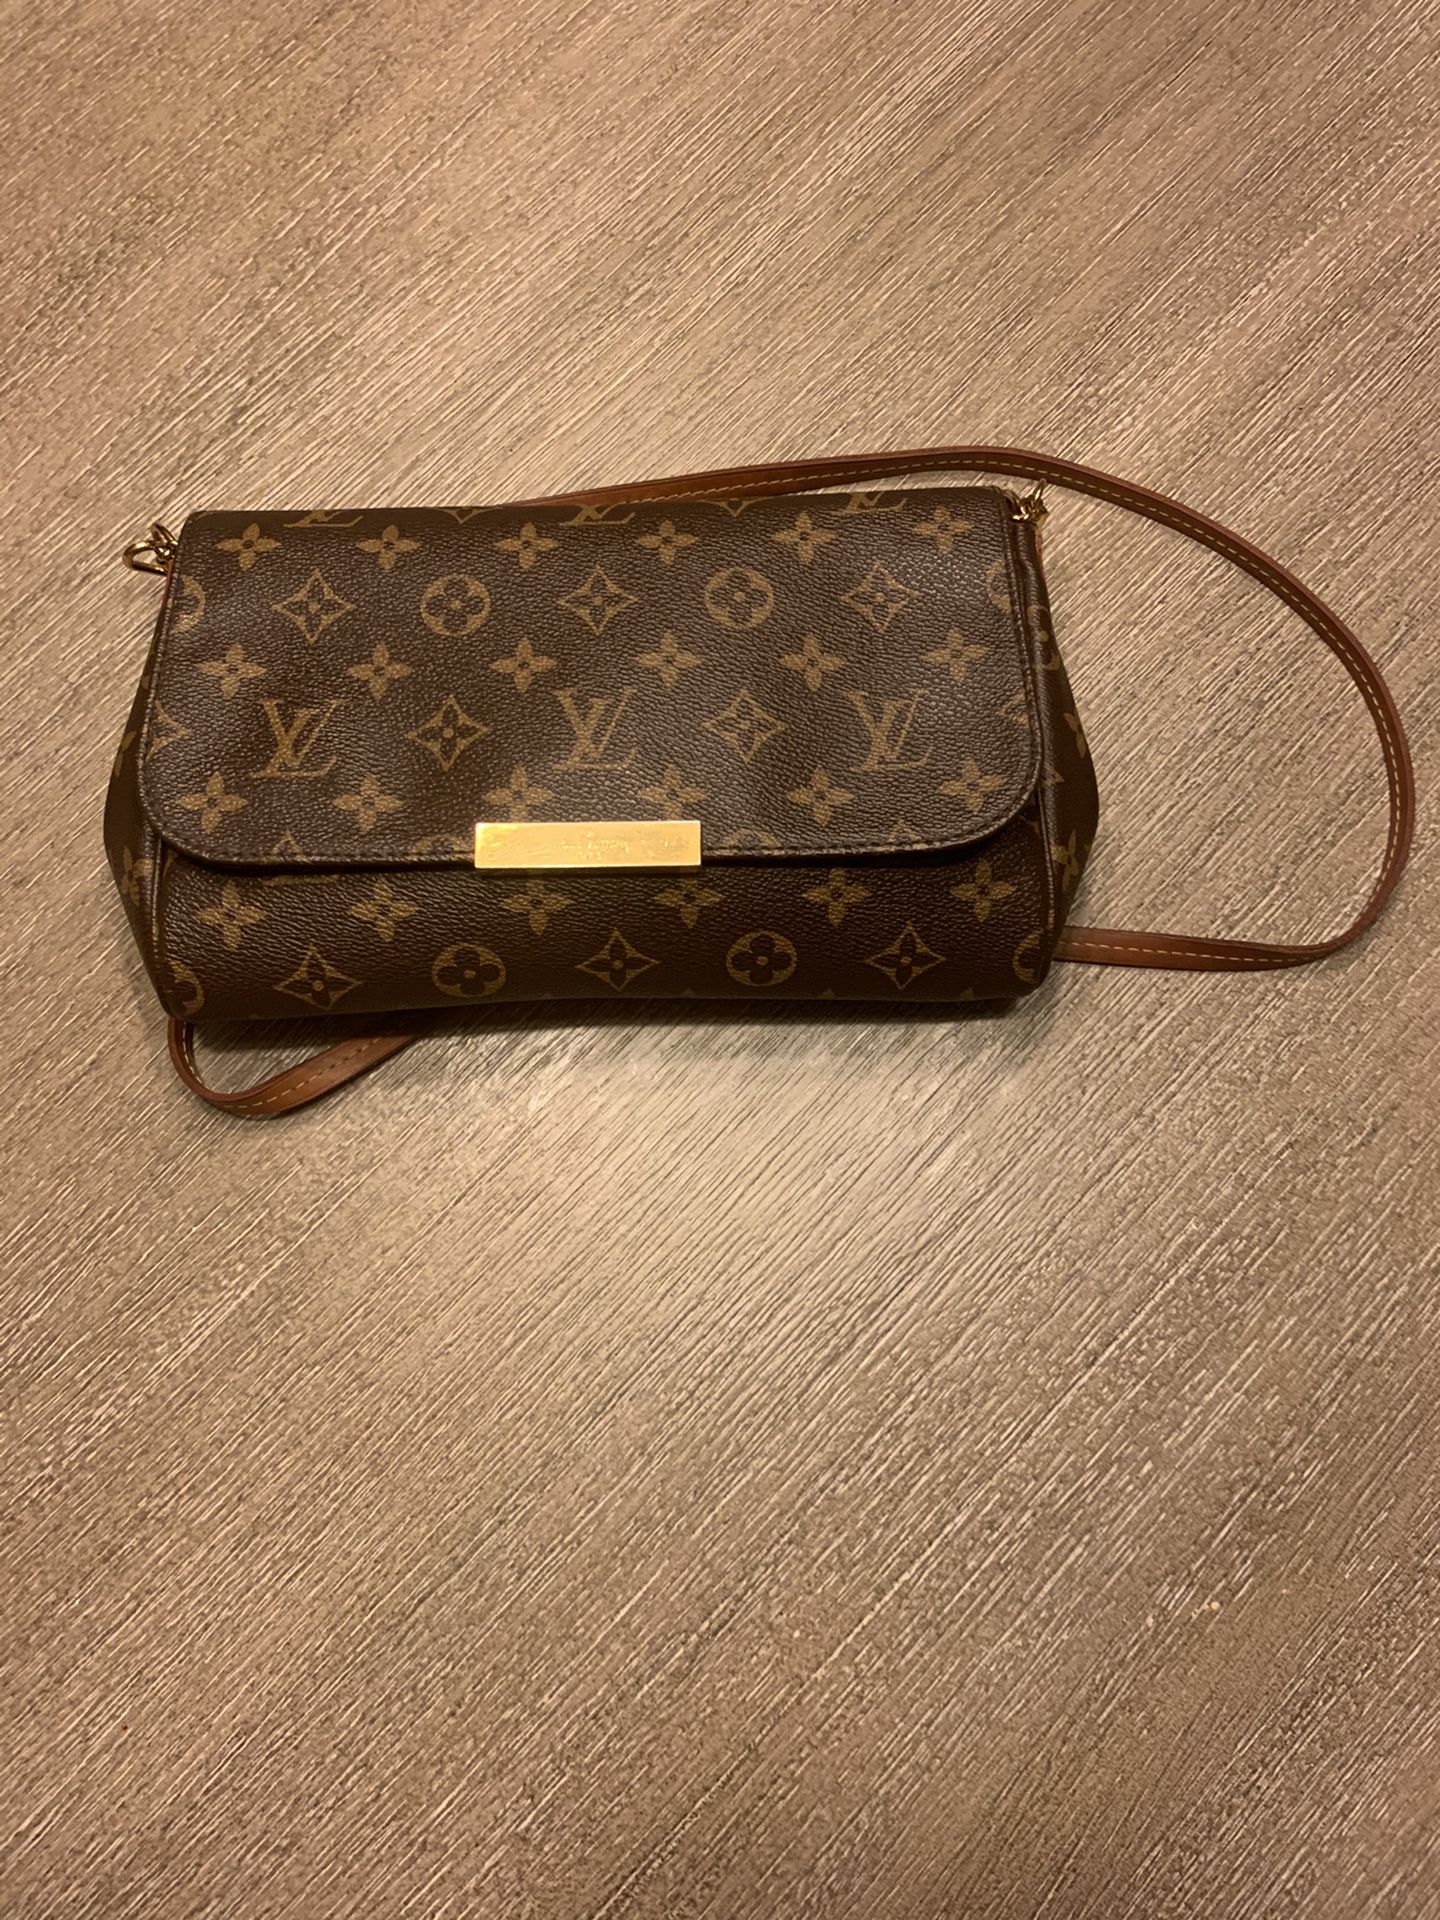 123456789101112 Louis Vuitton Favorite Pm Brown Coated Canvas Cross Body Bag